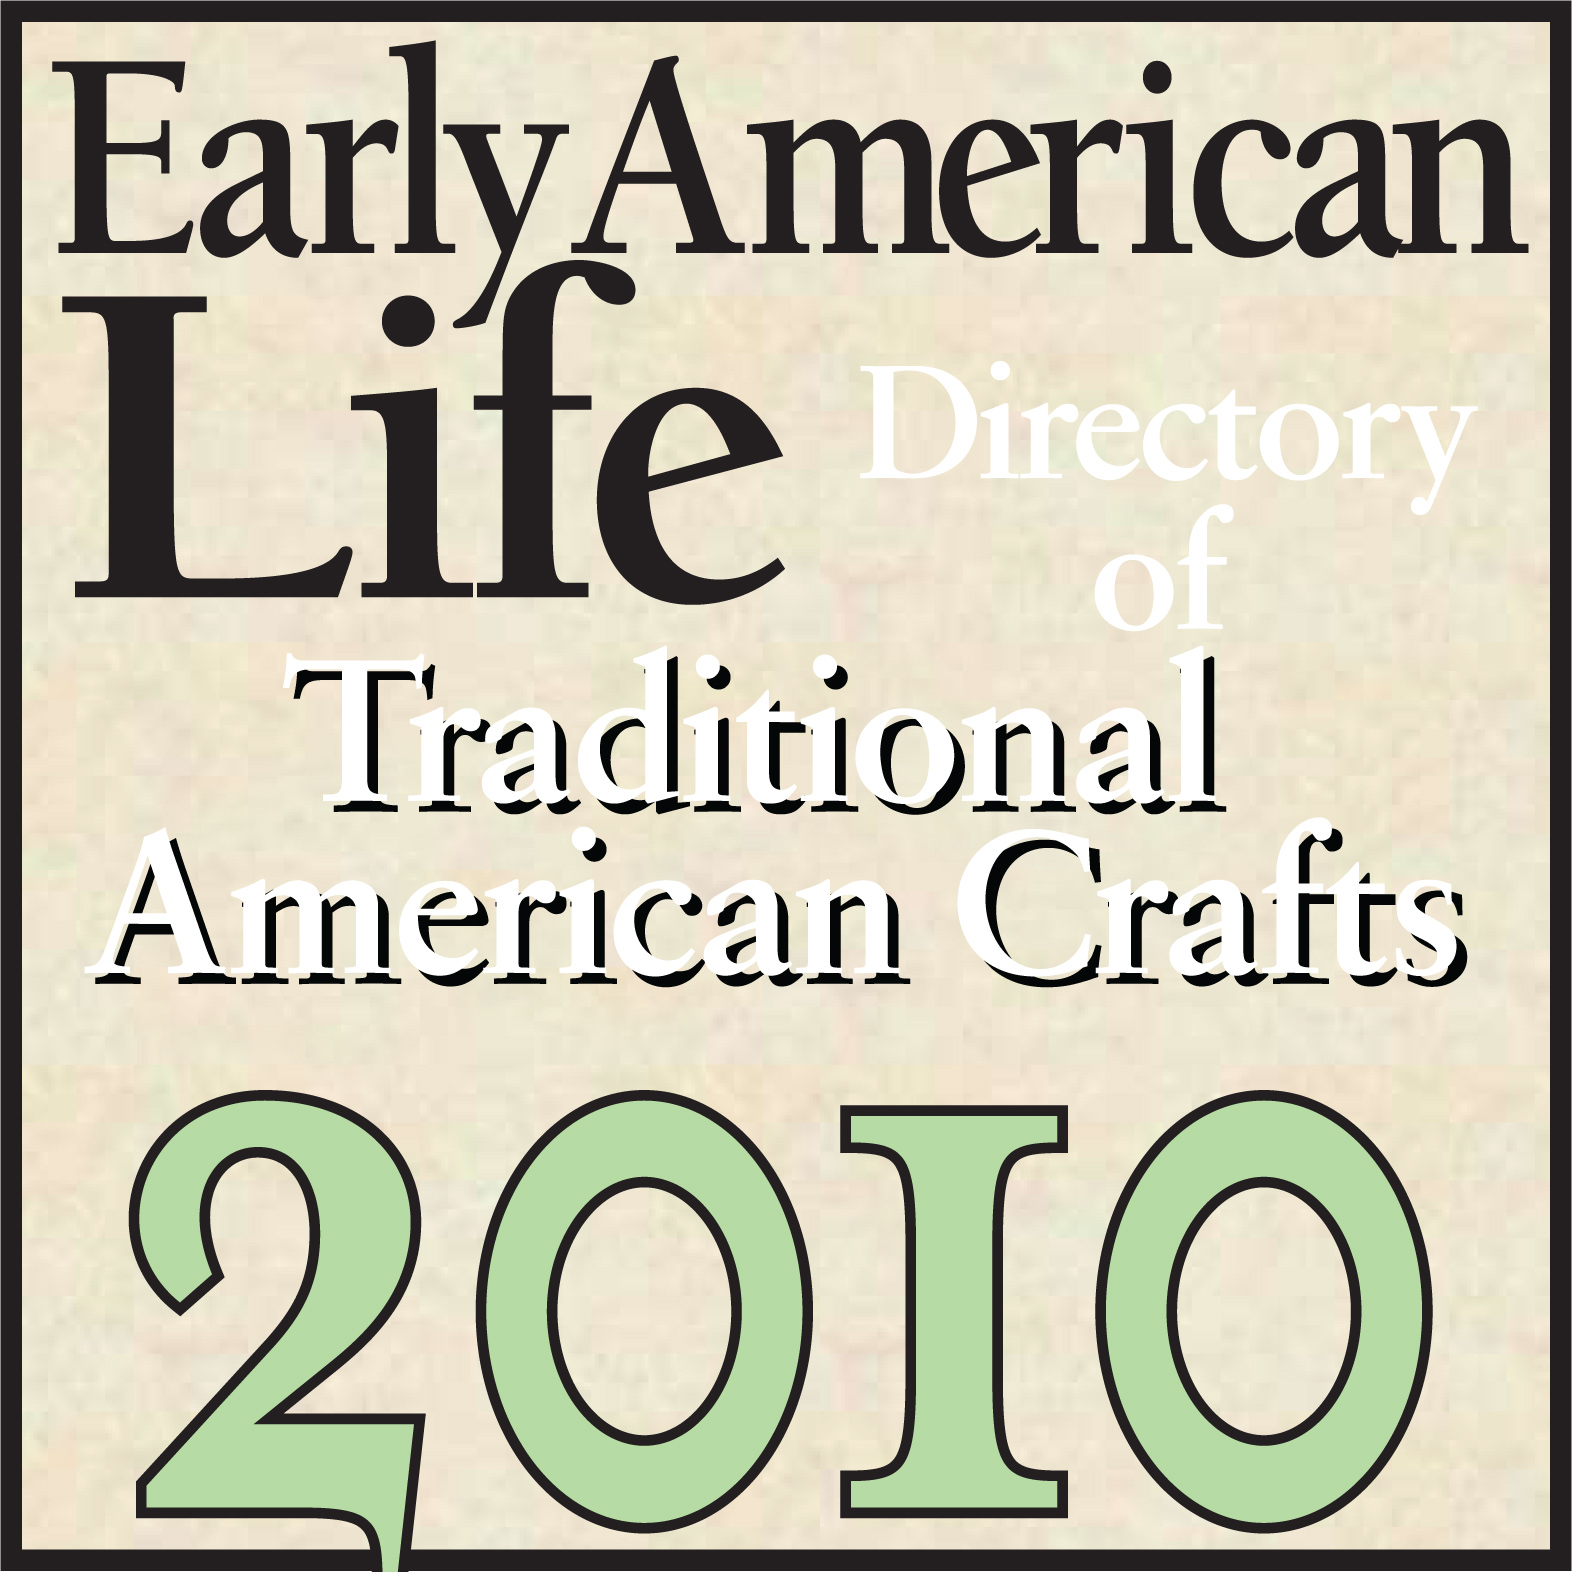 Early American Life Traditional American Crafts logo 2010